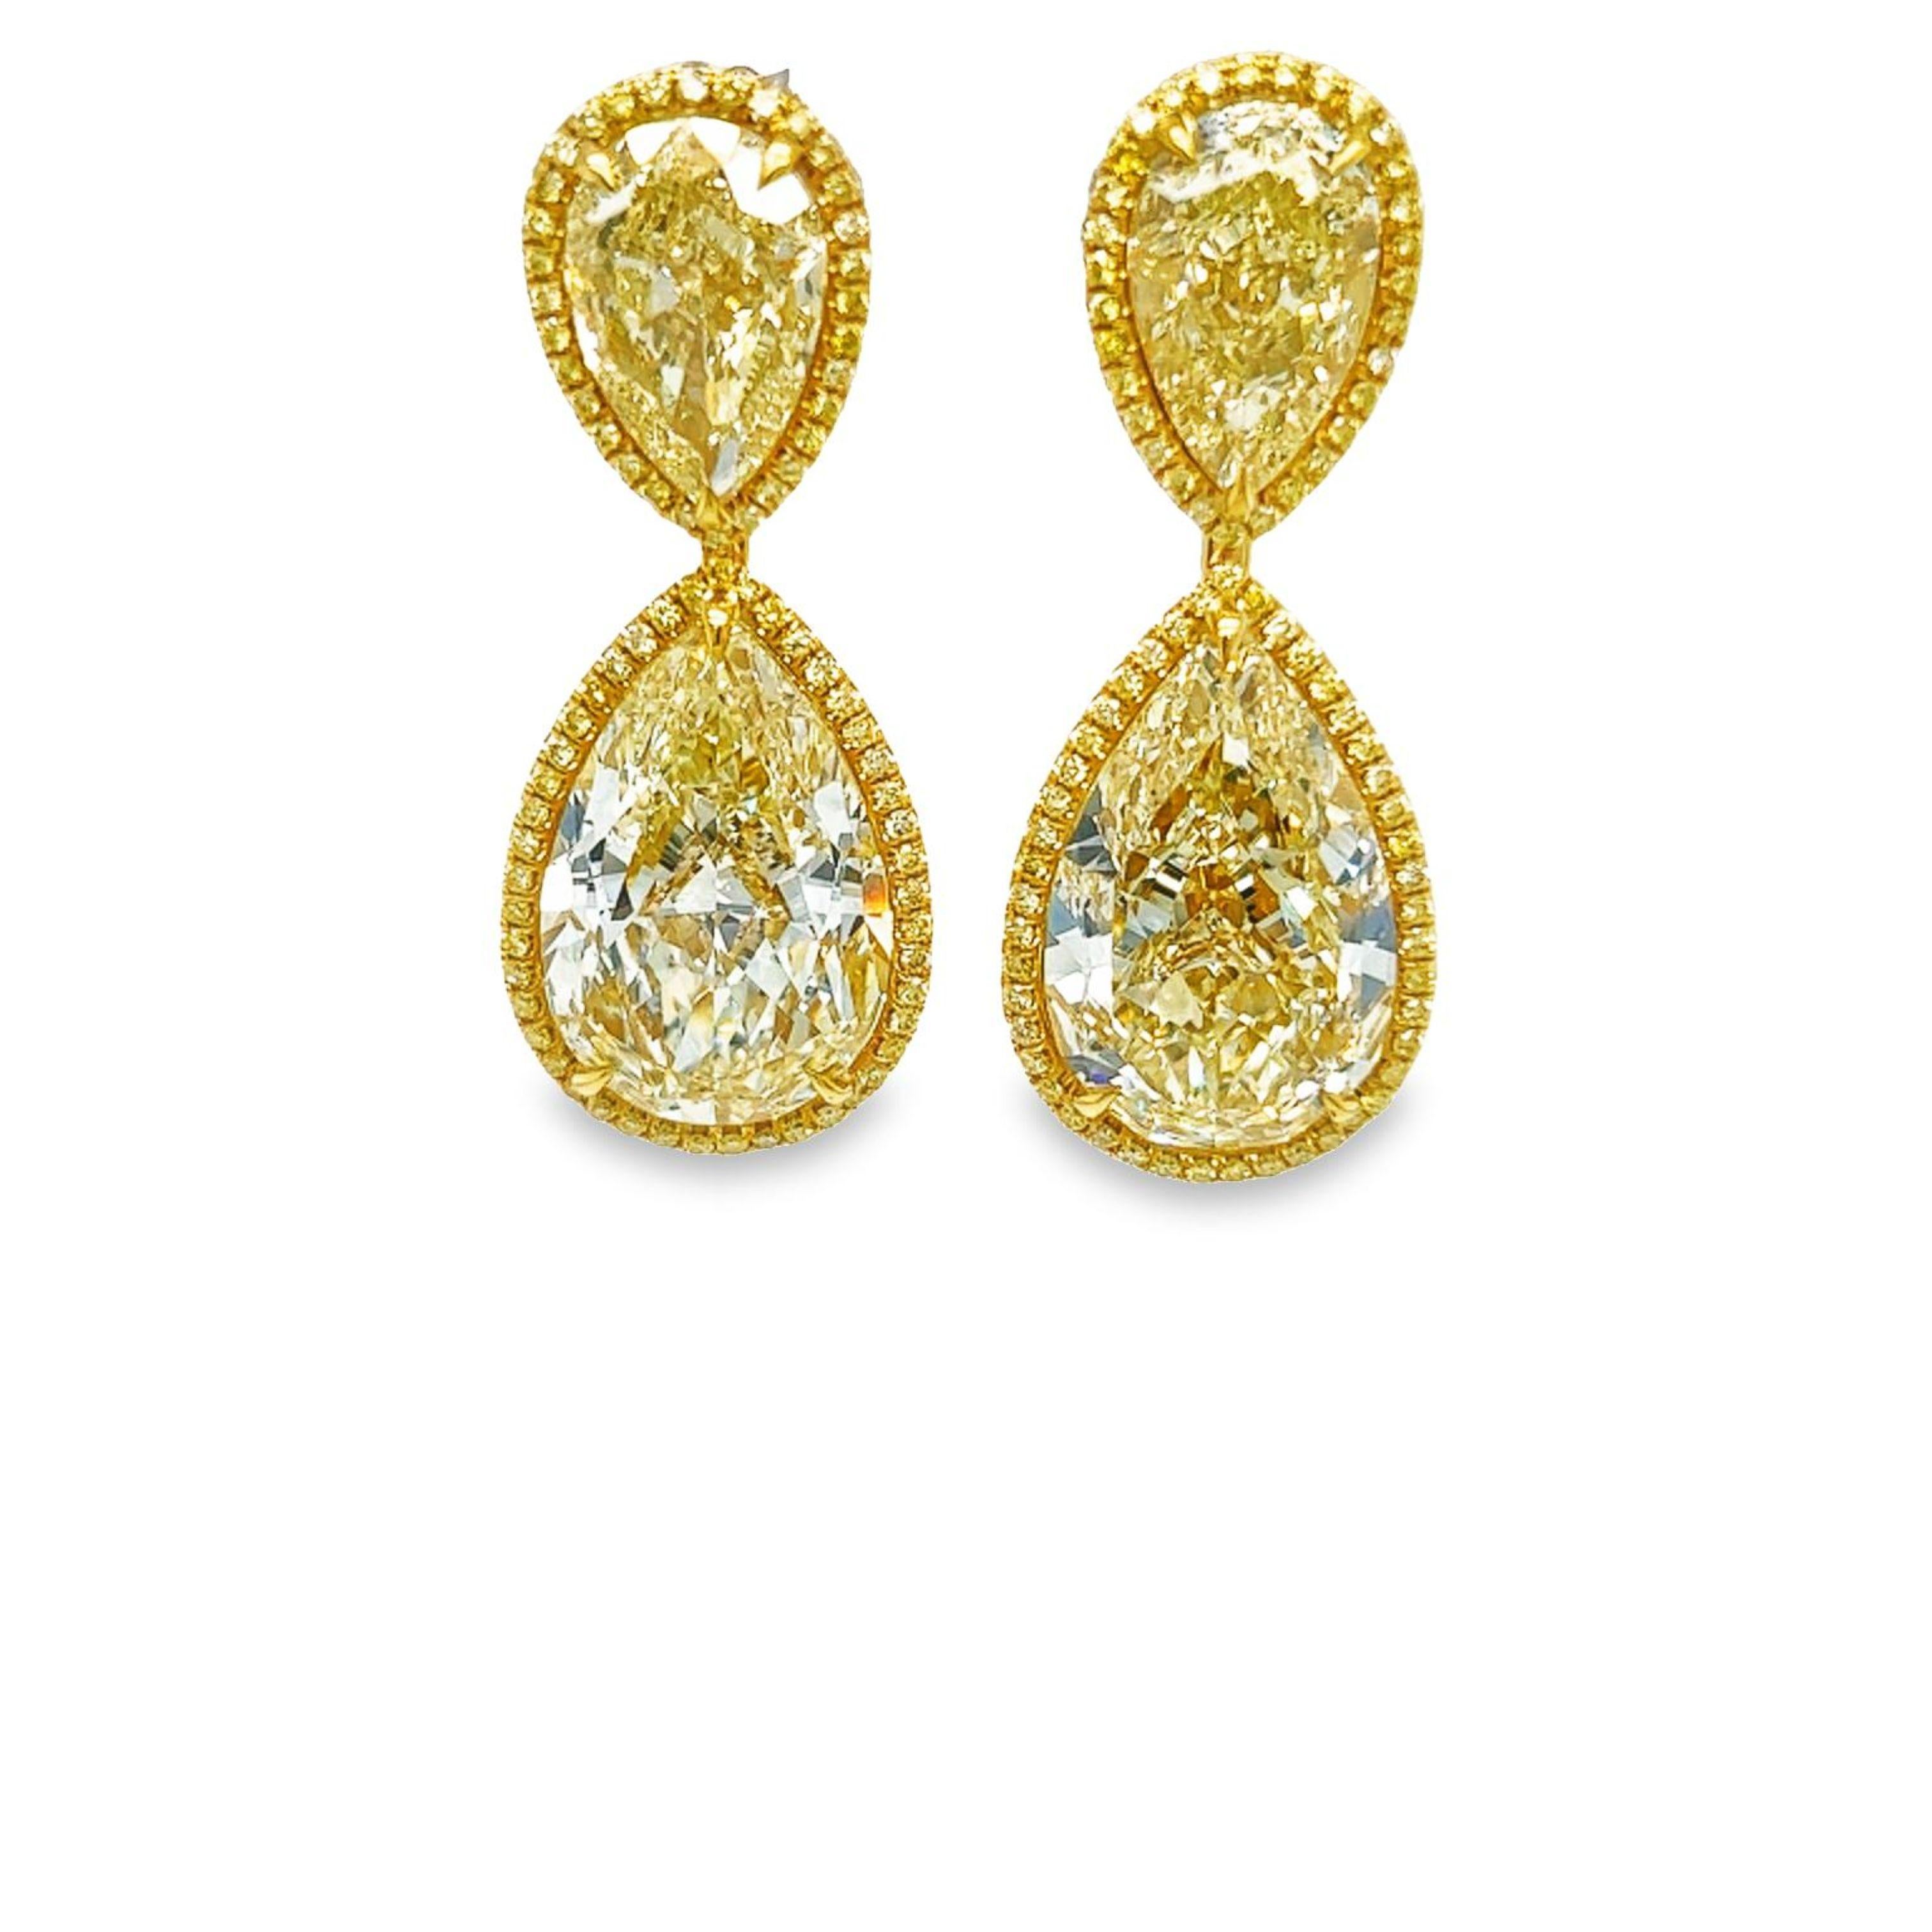 Get ready for a night out with this jaw dropping yellow diamond pear shape earrings VS - VVS clarity. This gorgeous light weight earrings are set in 18k yellow gold and surrounded by a beautiful yellow halo with .82 carat total weight designed by